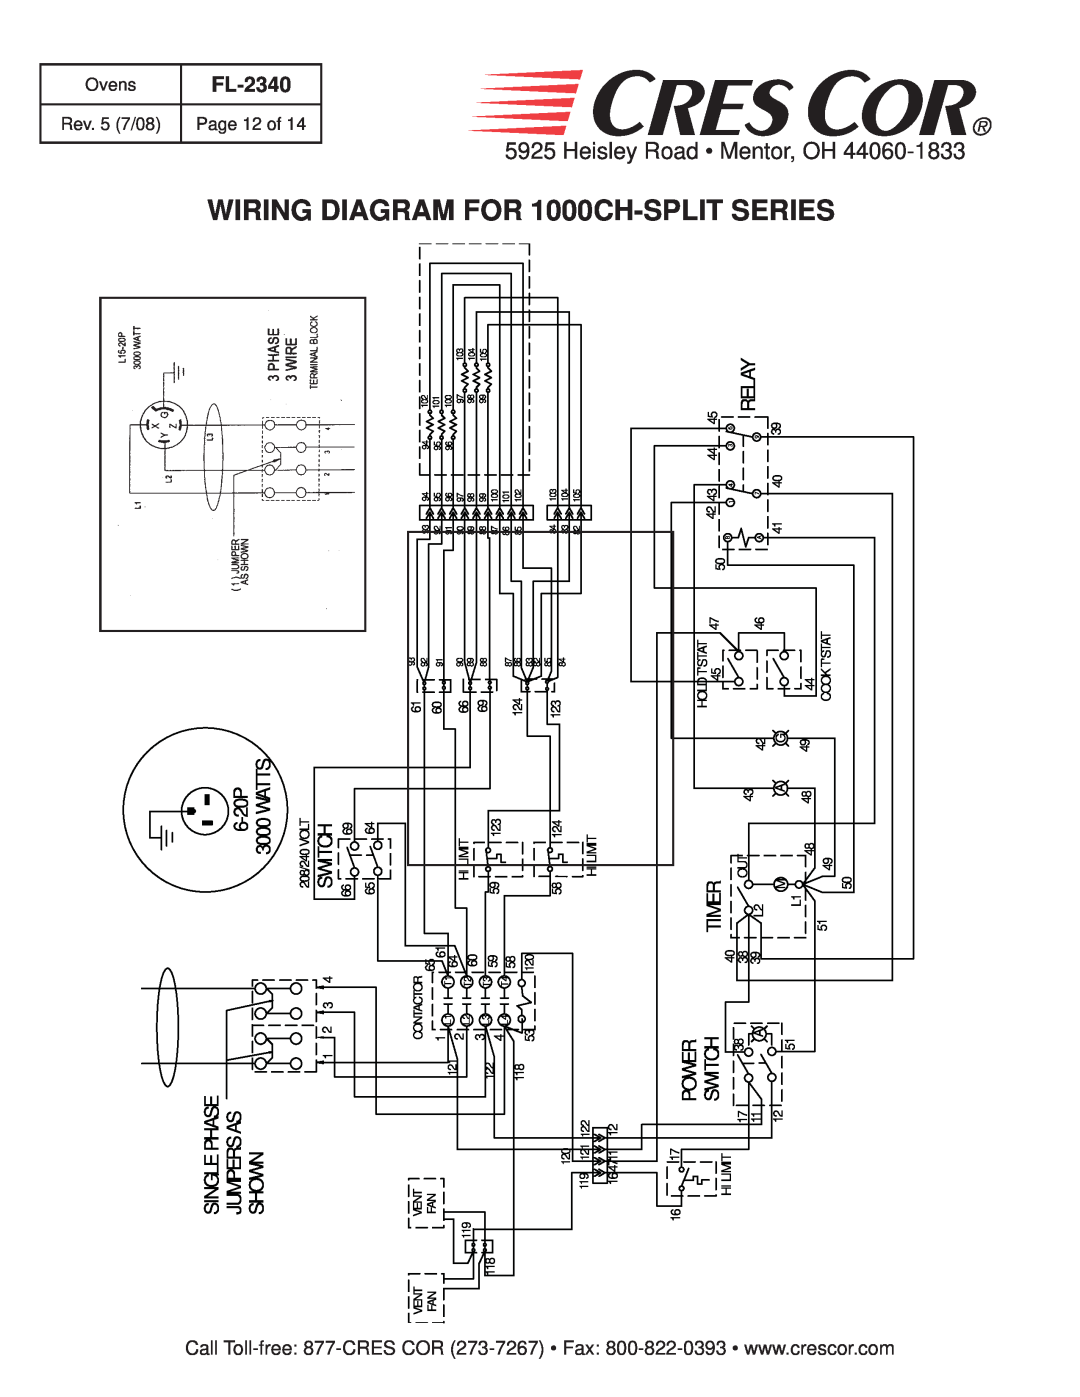 Cres Cor 1000-CH Series Wiring, DIAGRAM FOR 1000CH, Split Series, Heisley, Road Mentor, OH, 44060-1833, FL-2340, Shown 